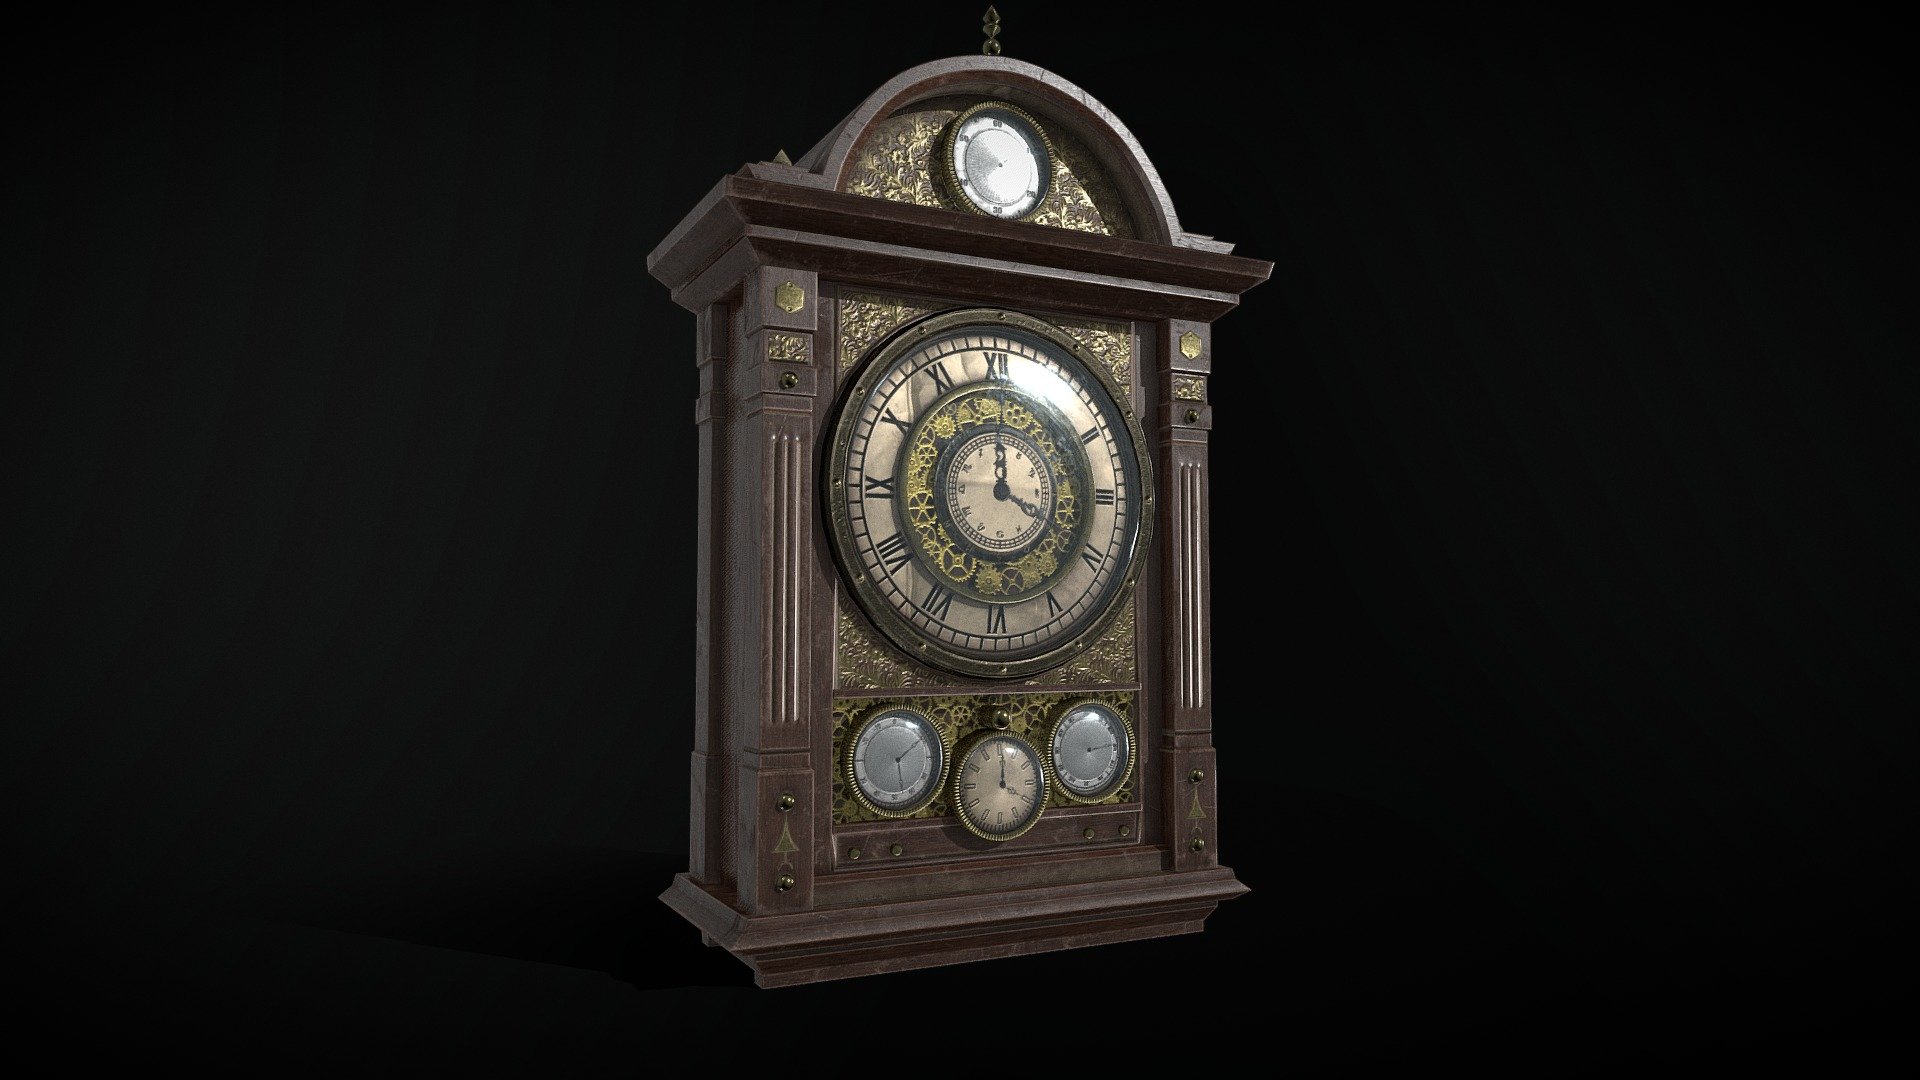 Steampunk style old wall clock.

Tris:  6126

Textures:

Clock [4096x4096]

Gears [2048x2048]

Glasses [2048x2048]

Soft: 3DsMax, Substance Painter, Photoshop, Marmoset Toolbag

Subscribe, It's very important for me:

Instagram

Artstation

Sketchfab

LinkedIn

 - Old wall clock - Download Free 3D model by sergeilihandristov 3d model